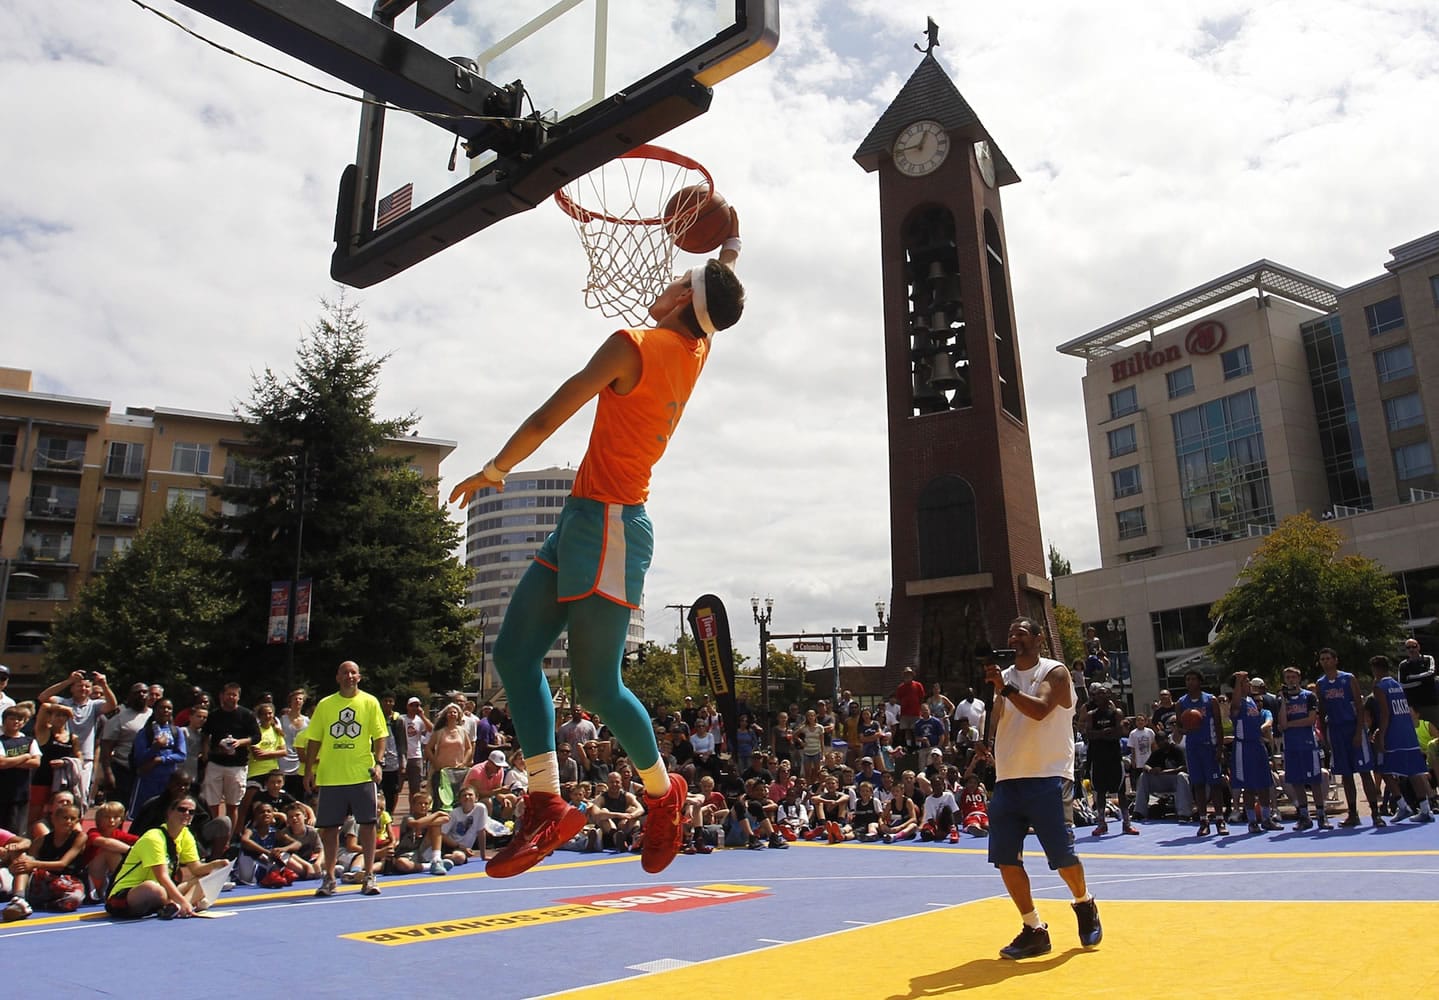 Tanner Fogle elevates in the slam dunk contest at Hoops on the River Saturday in Esther Short Park in downtown Vancouver.